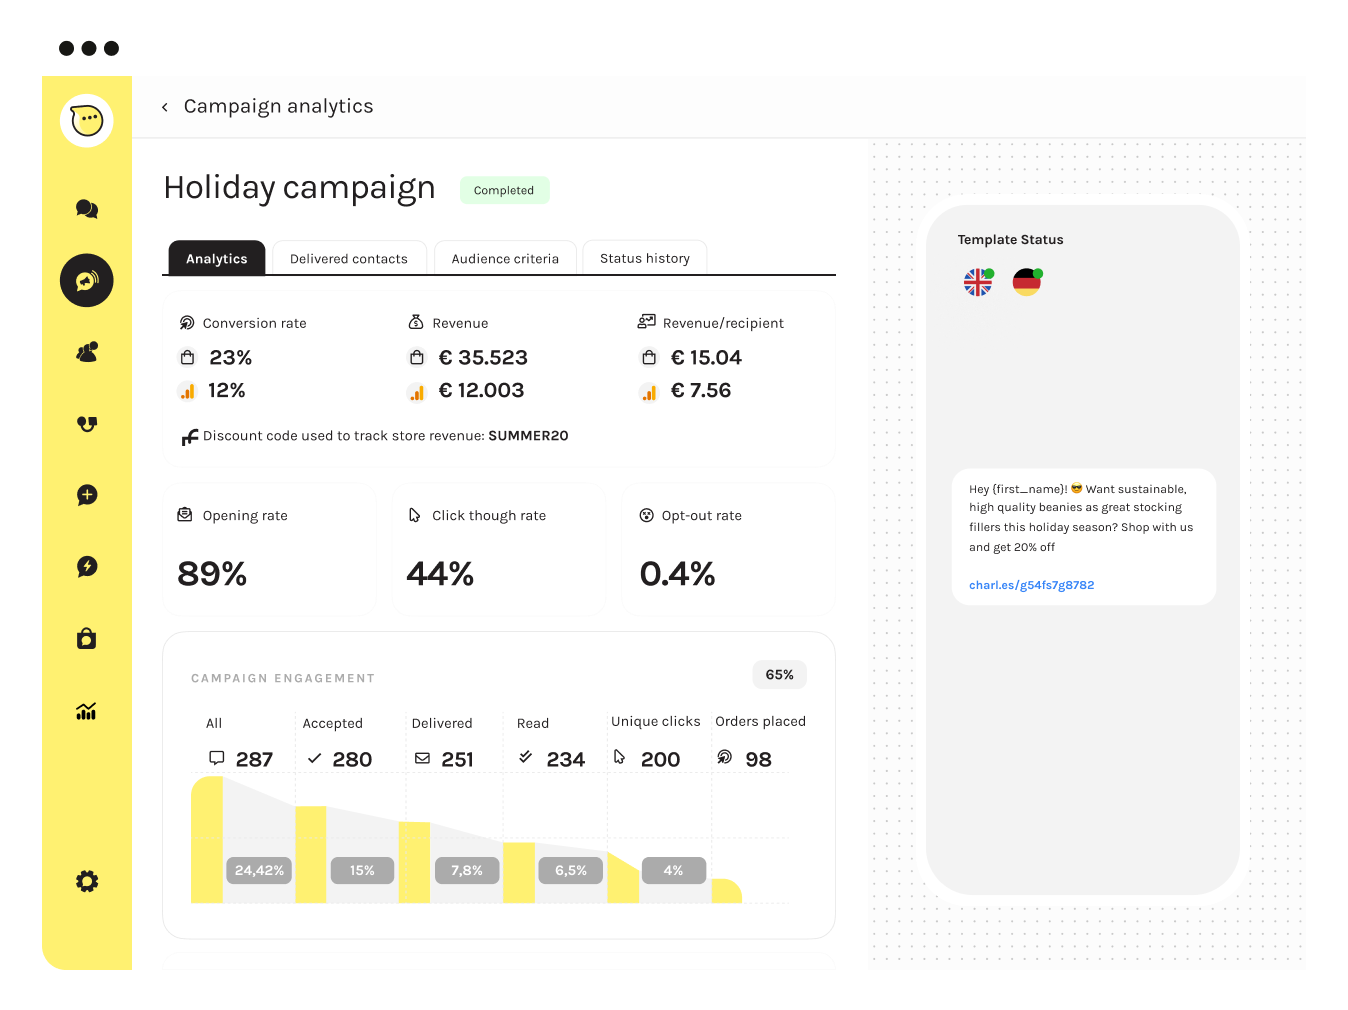 Dashboard view of holiday campaign analytics showing conversion rate, revenue, discount code tracking, and engagement metrics - Whatsapp Marketing